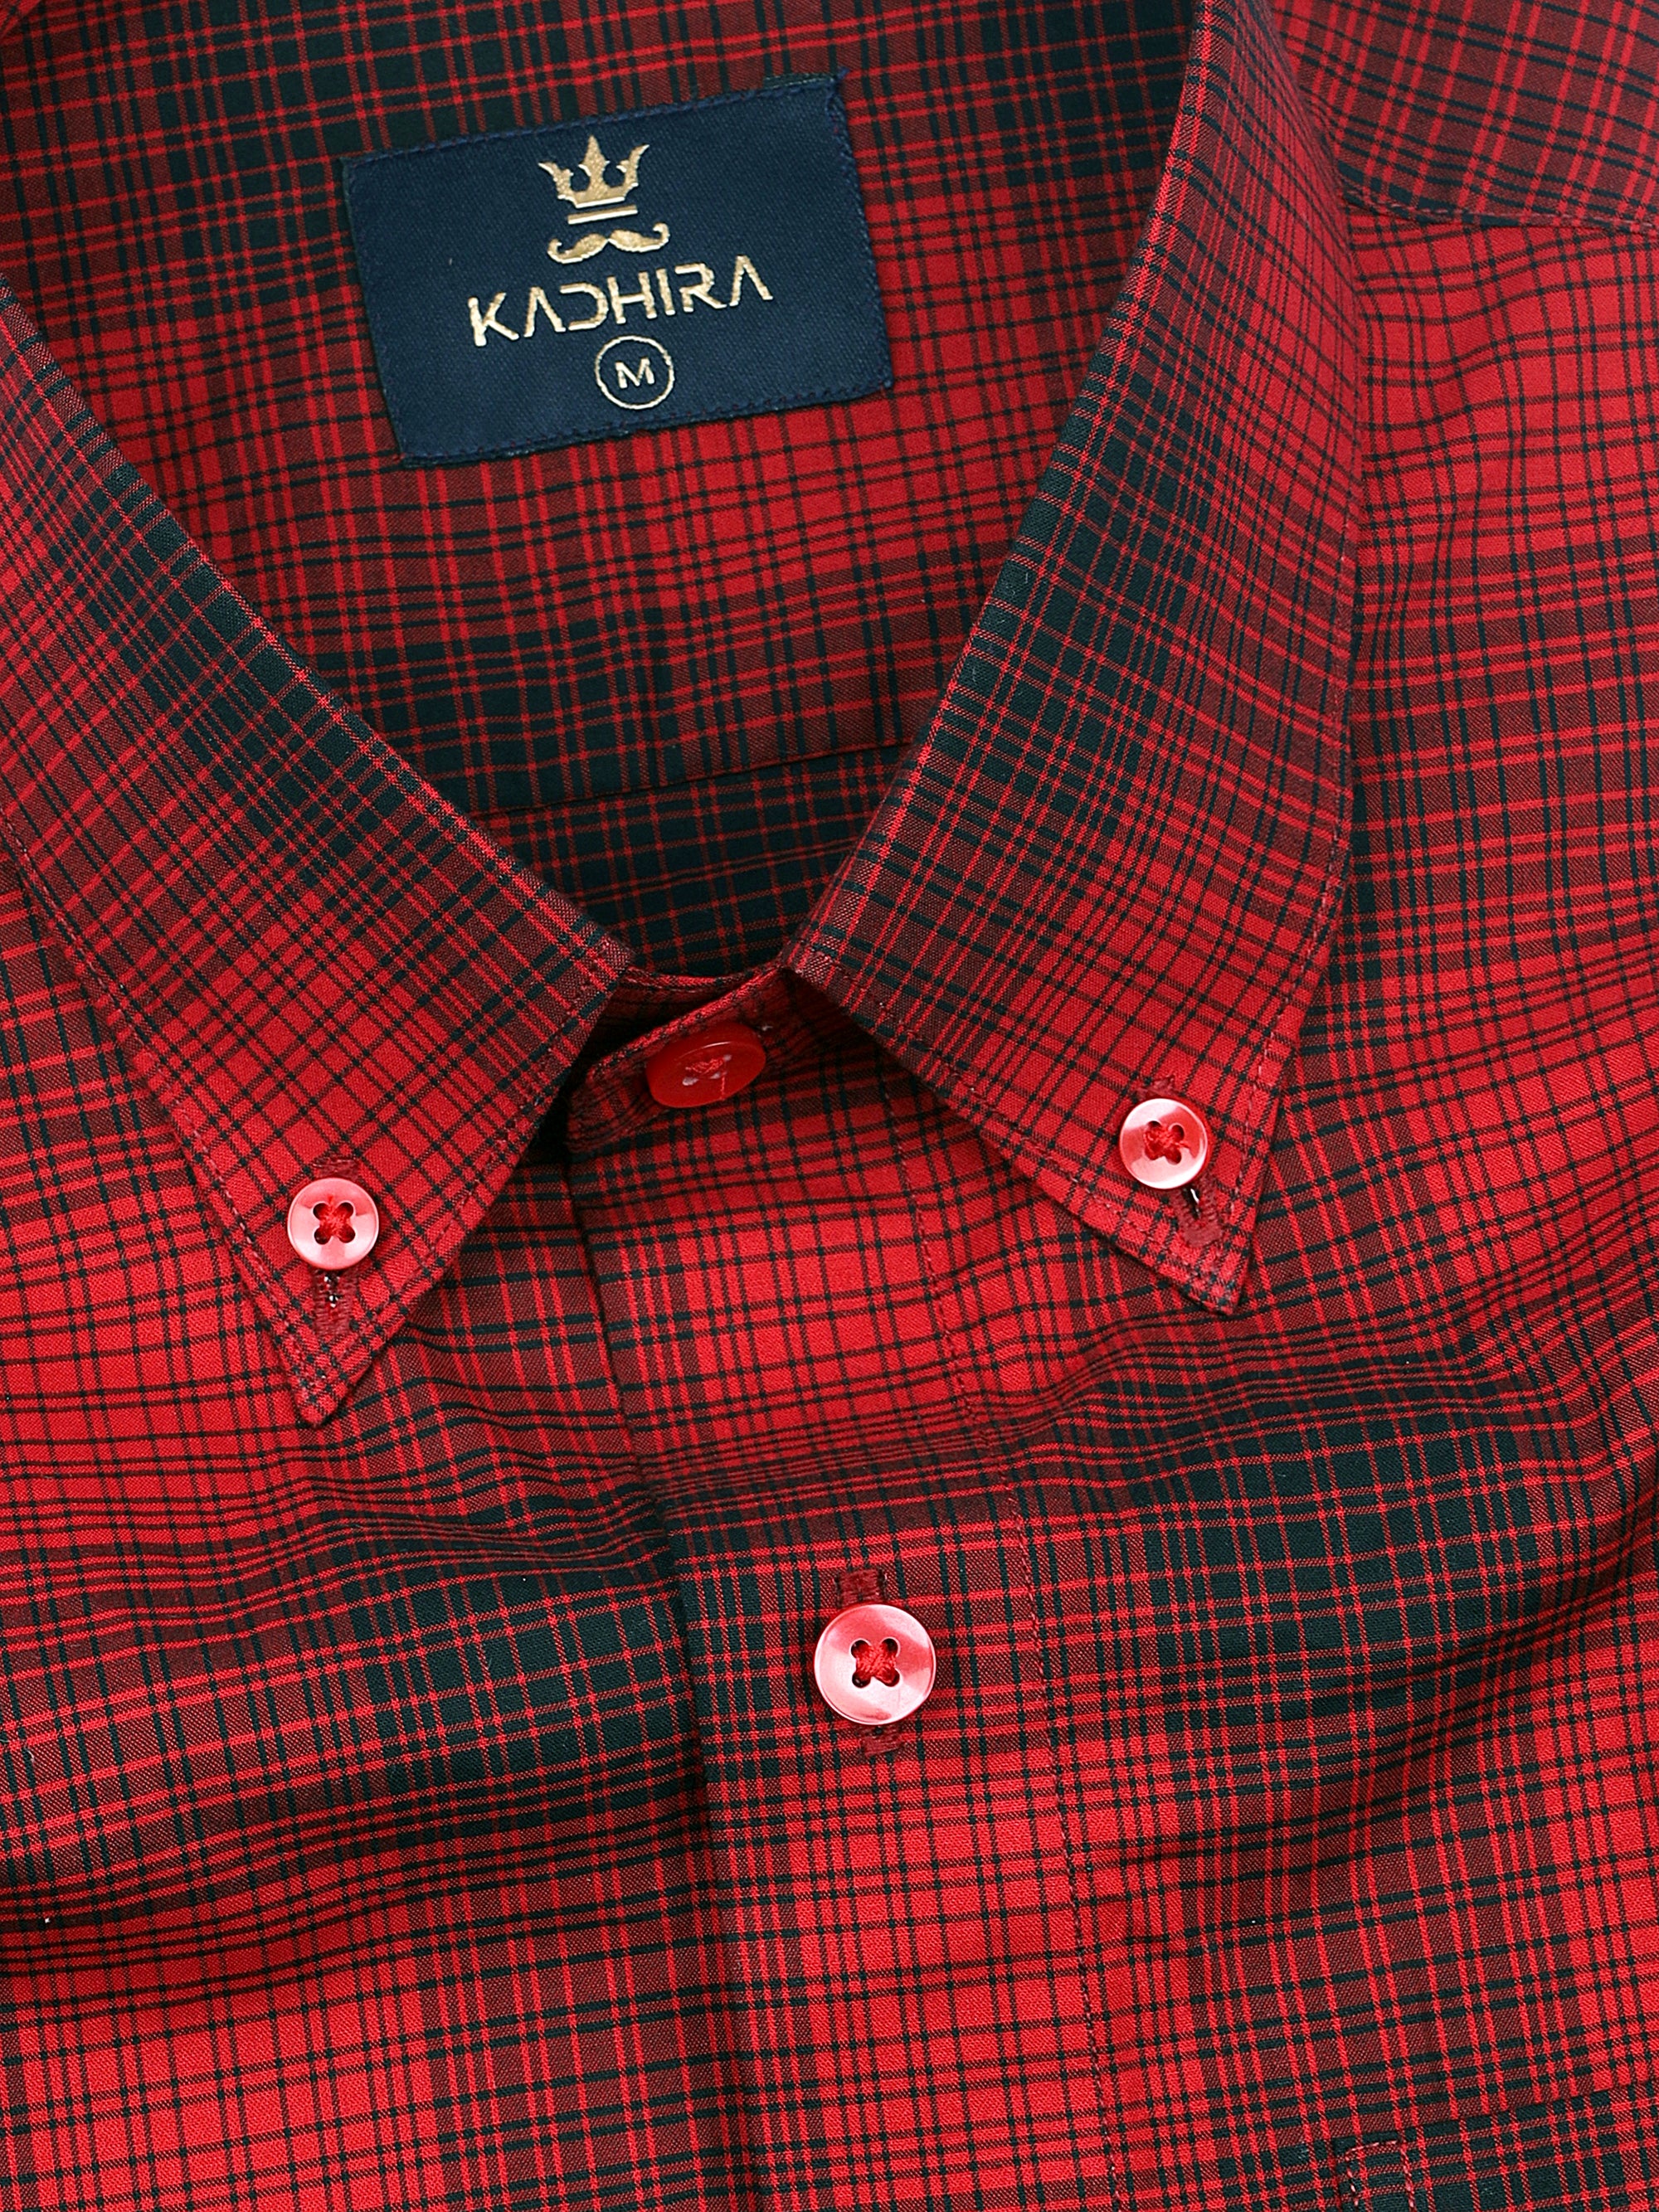 Imperial Red With Black Checkered Oxford Cotton Shirt-[ON SALE]